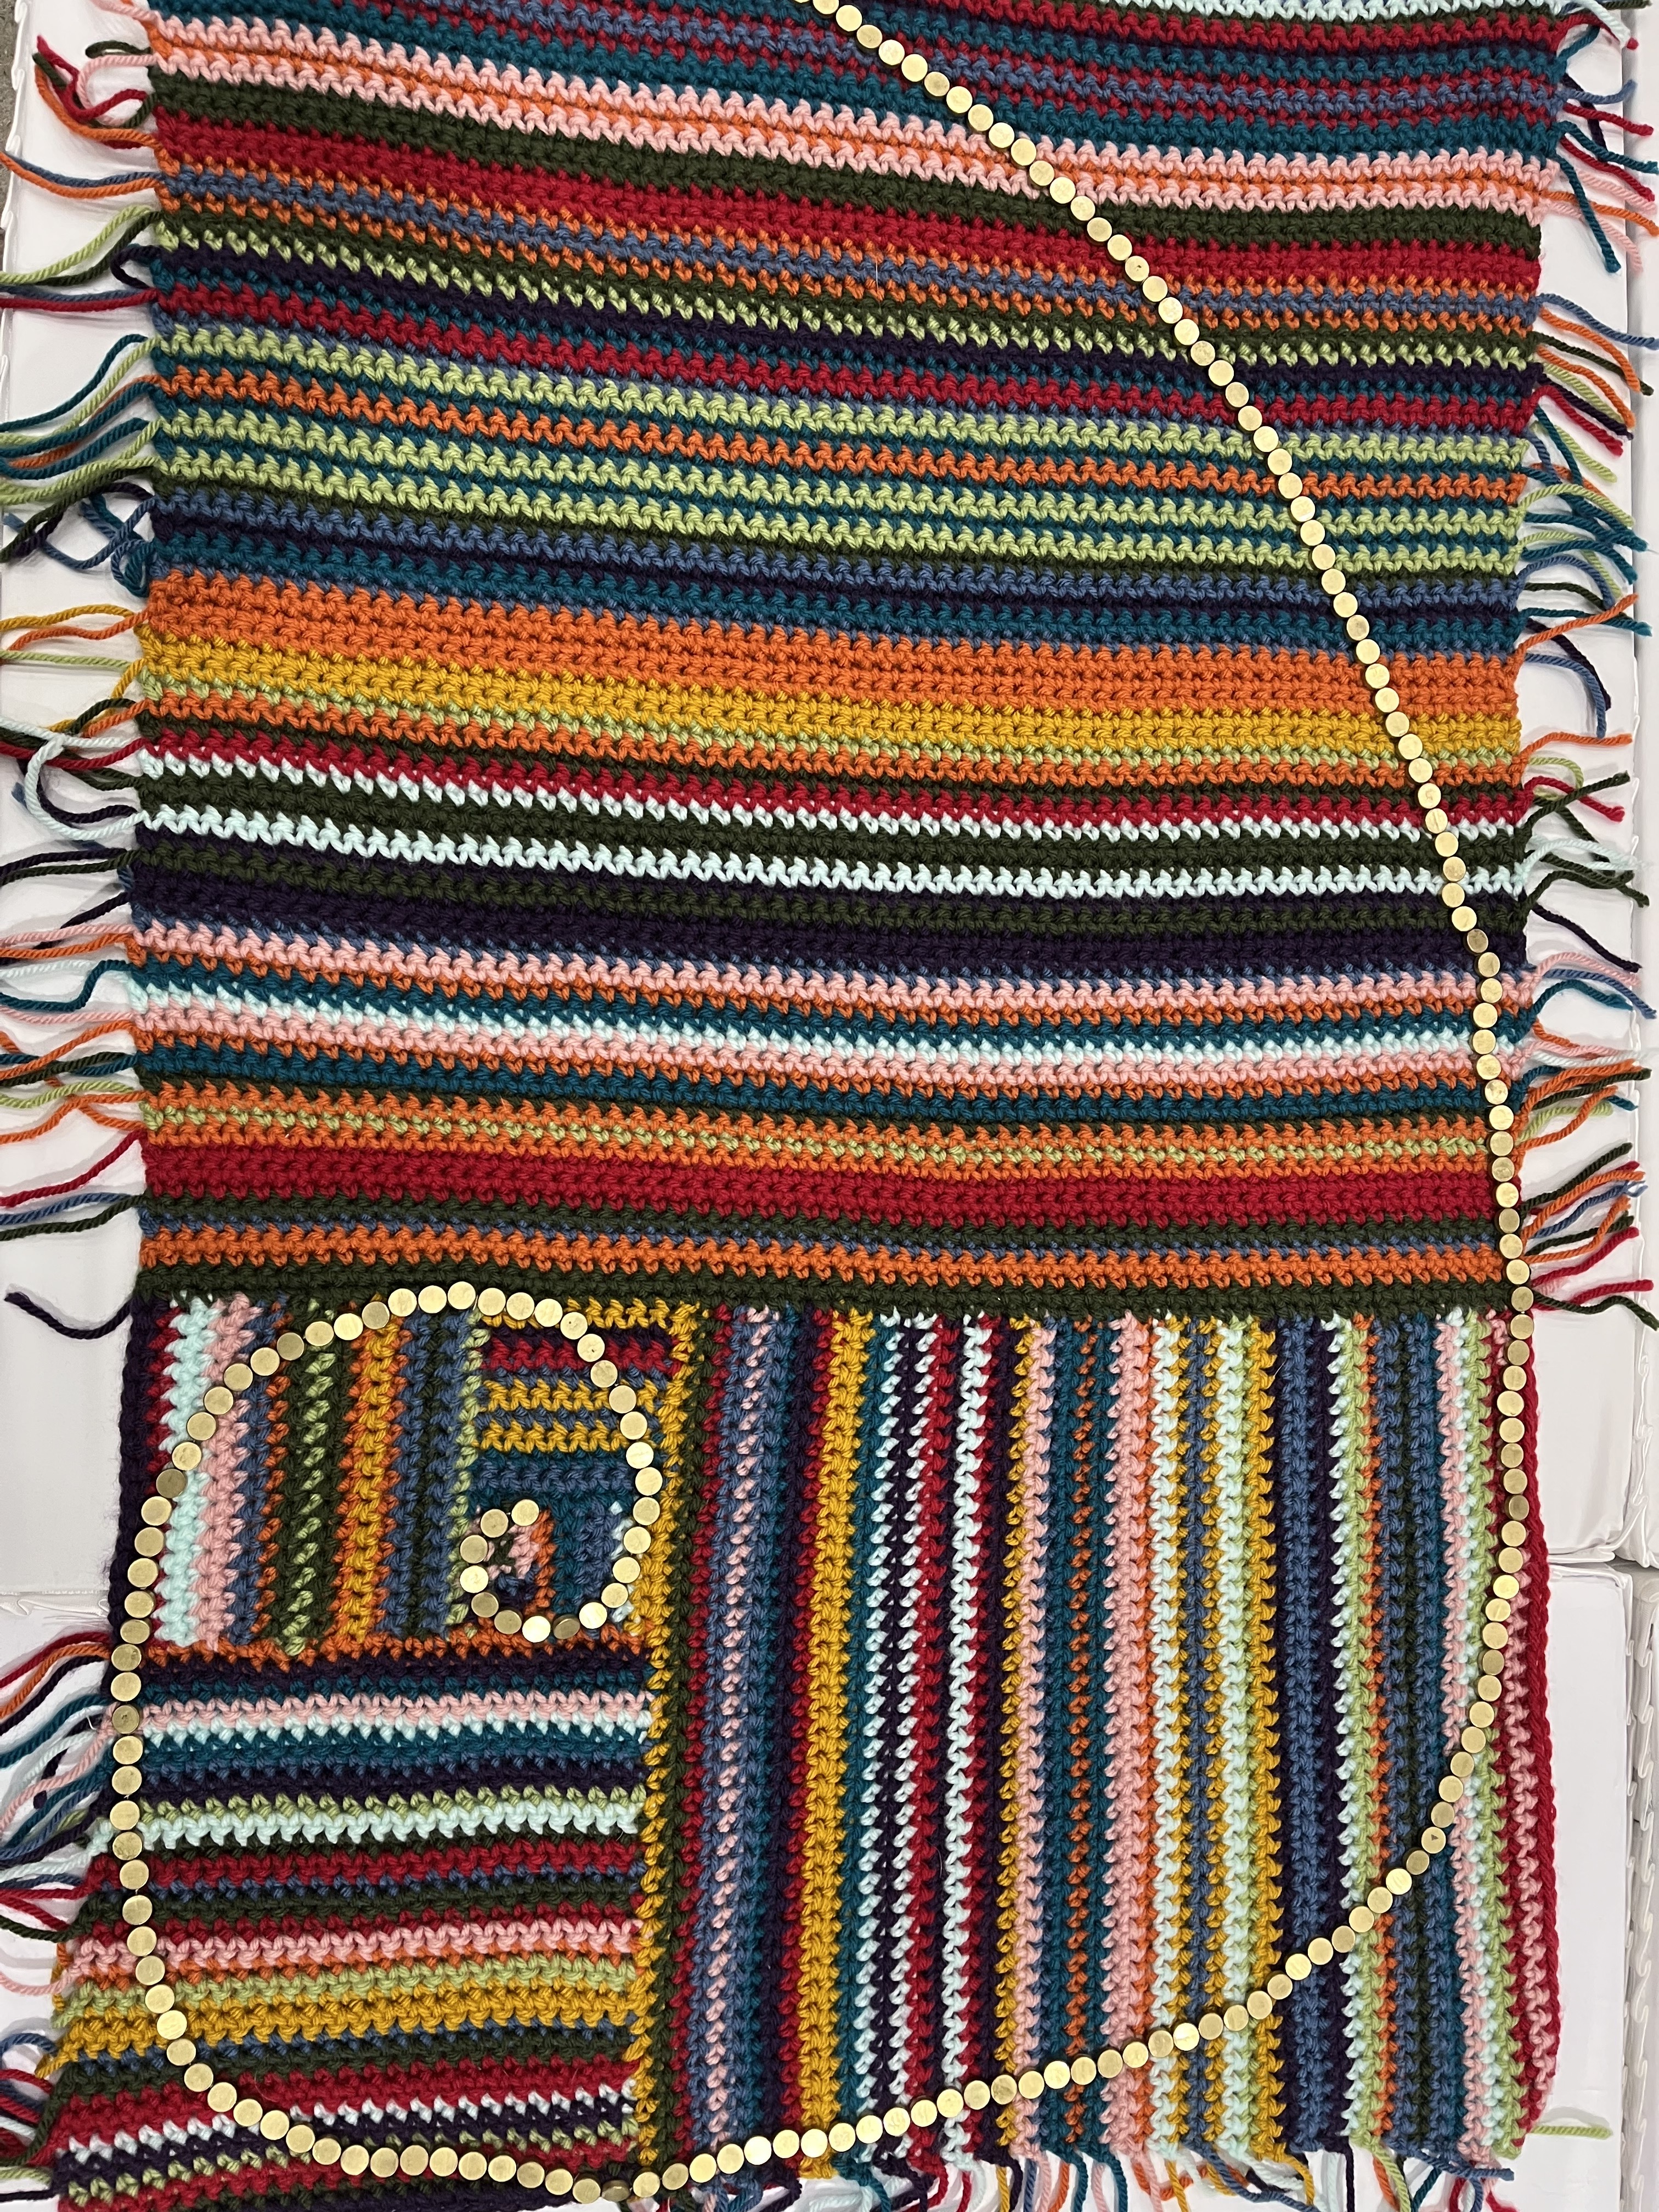 A rectangular, multicolor, crocheted piece of mathematical art representing the golden ratio, the dimensions of squares making up the rectangle flow the Fibonacchi sequence. By Dennis Bromley, Samantha Pezzimenti and Marina Skyers at the University of Kentuckey Math Lab. Displayed at the 2023 Joint Math Meetings.  